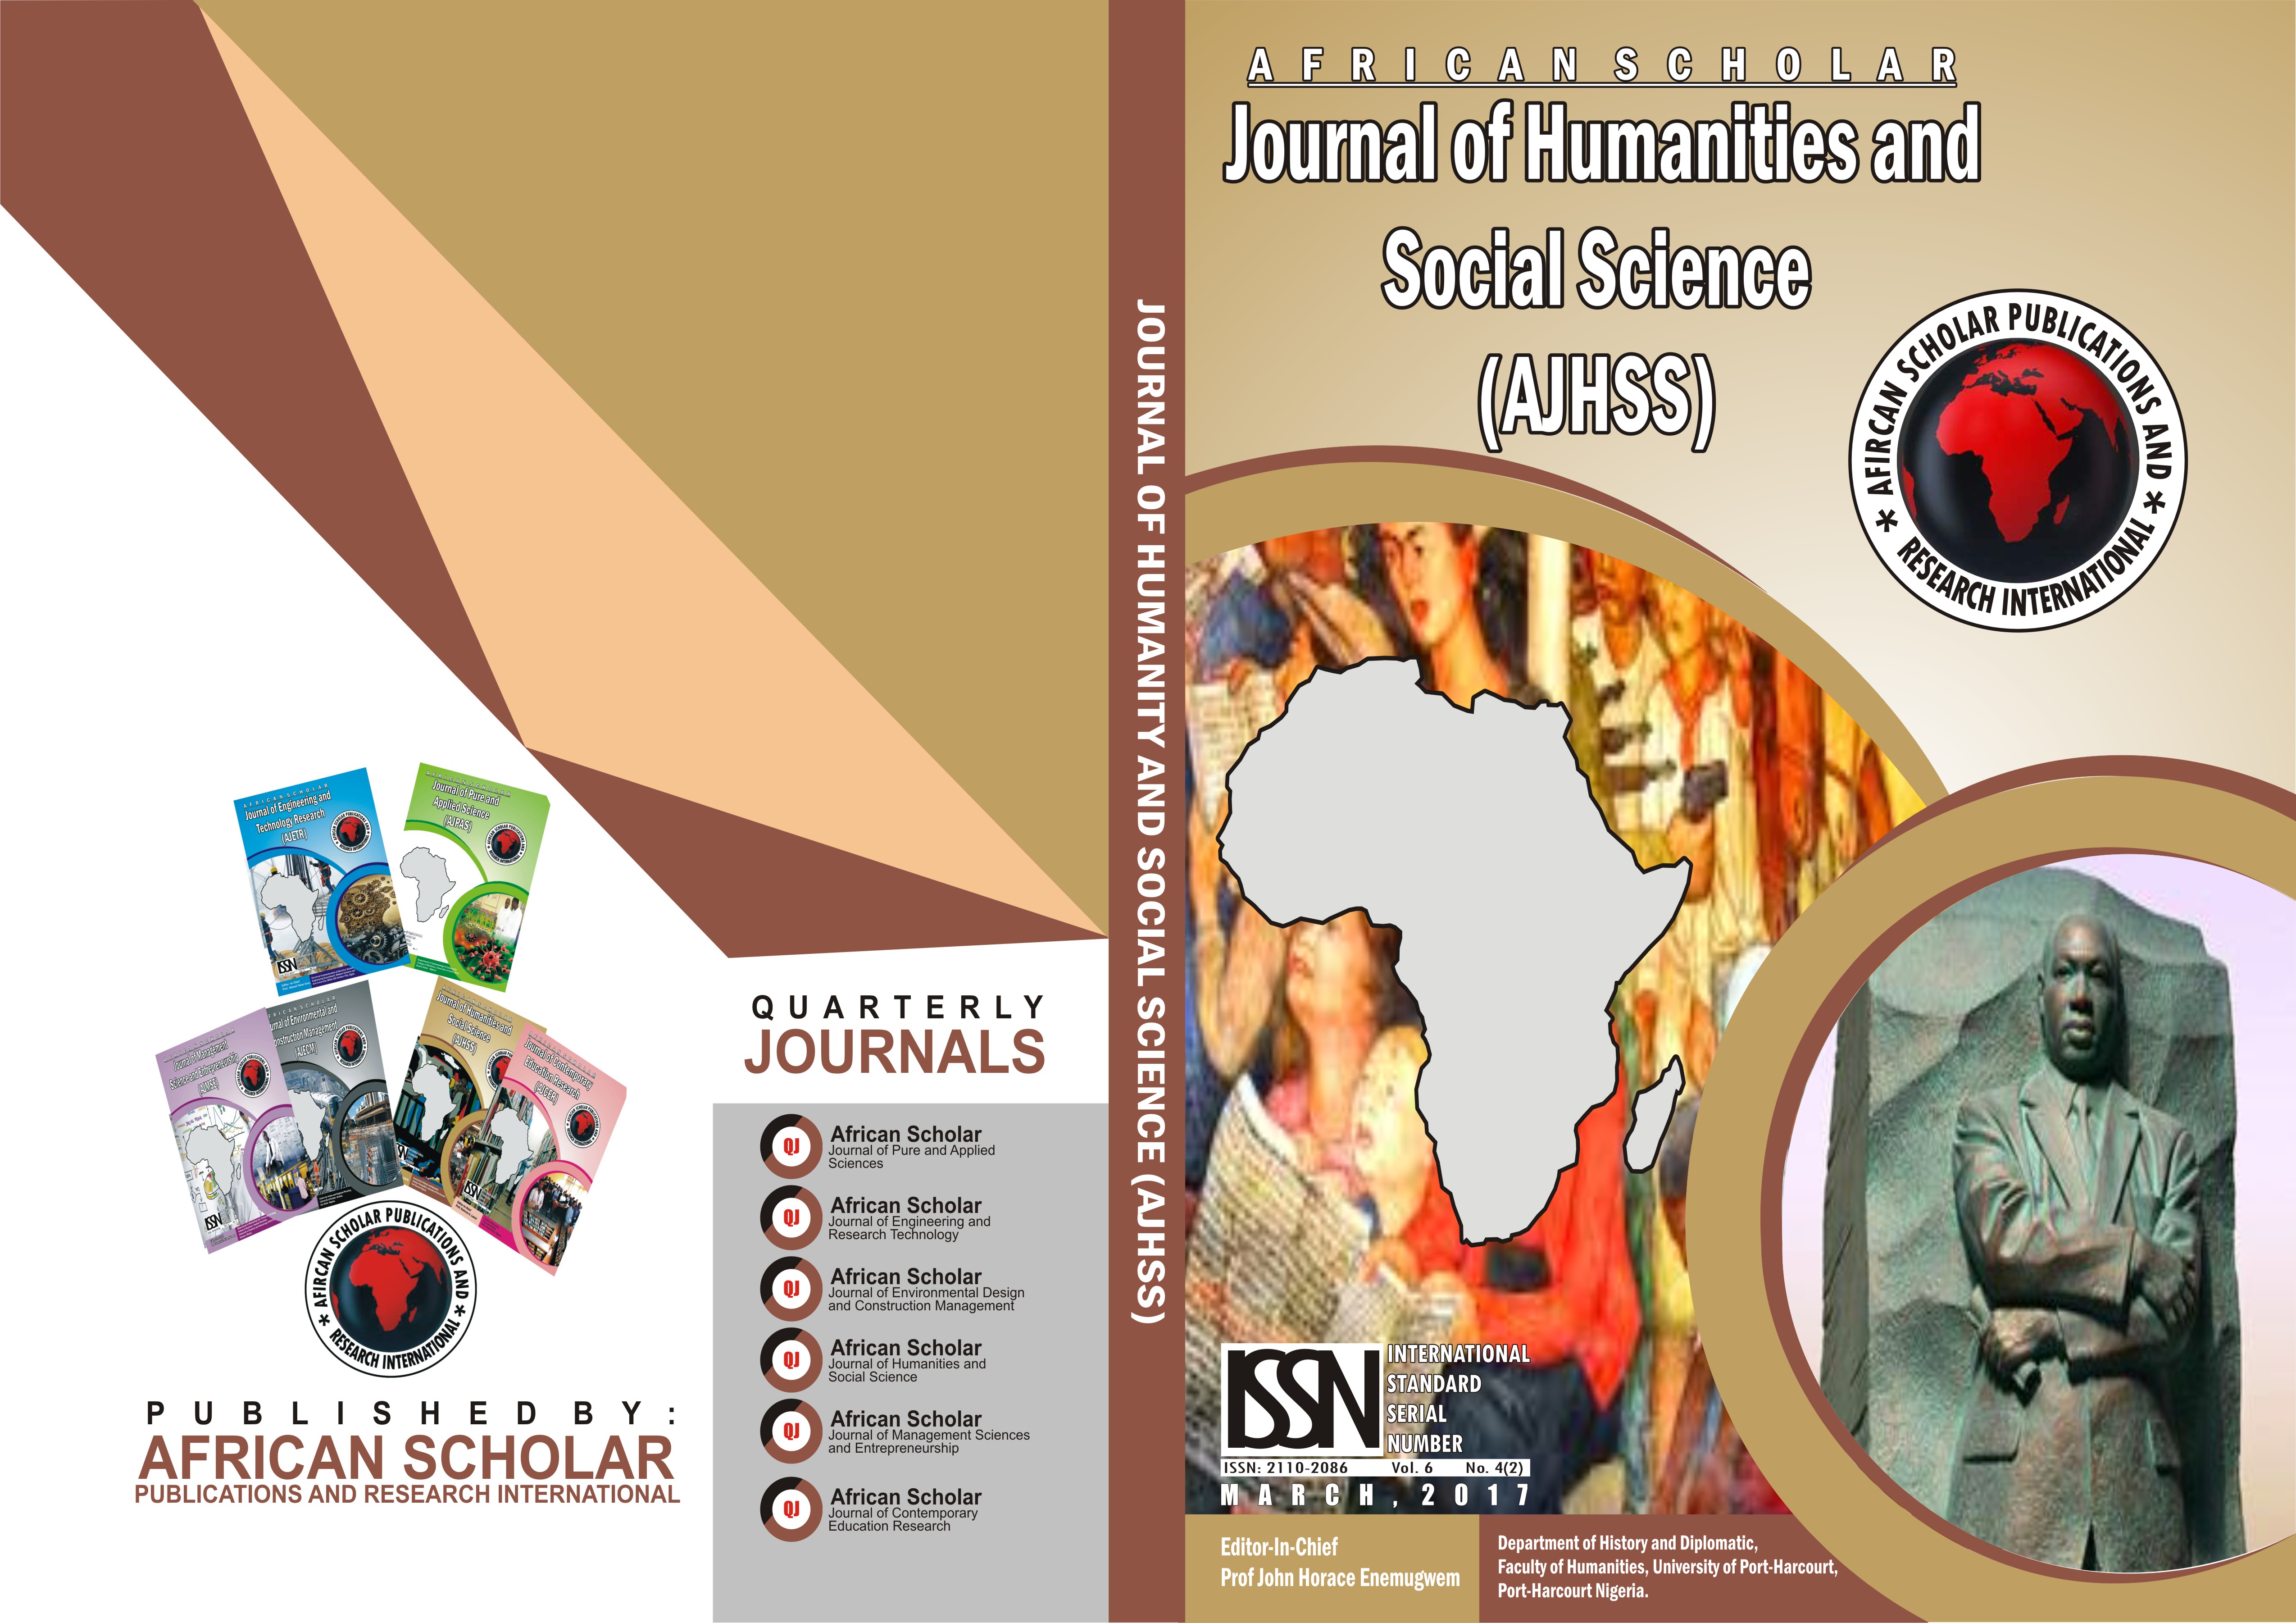 African Scholar Publications and Research International.